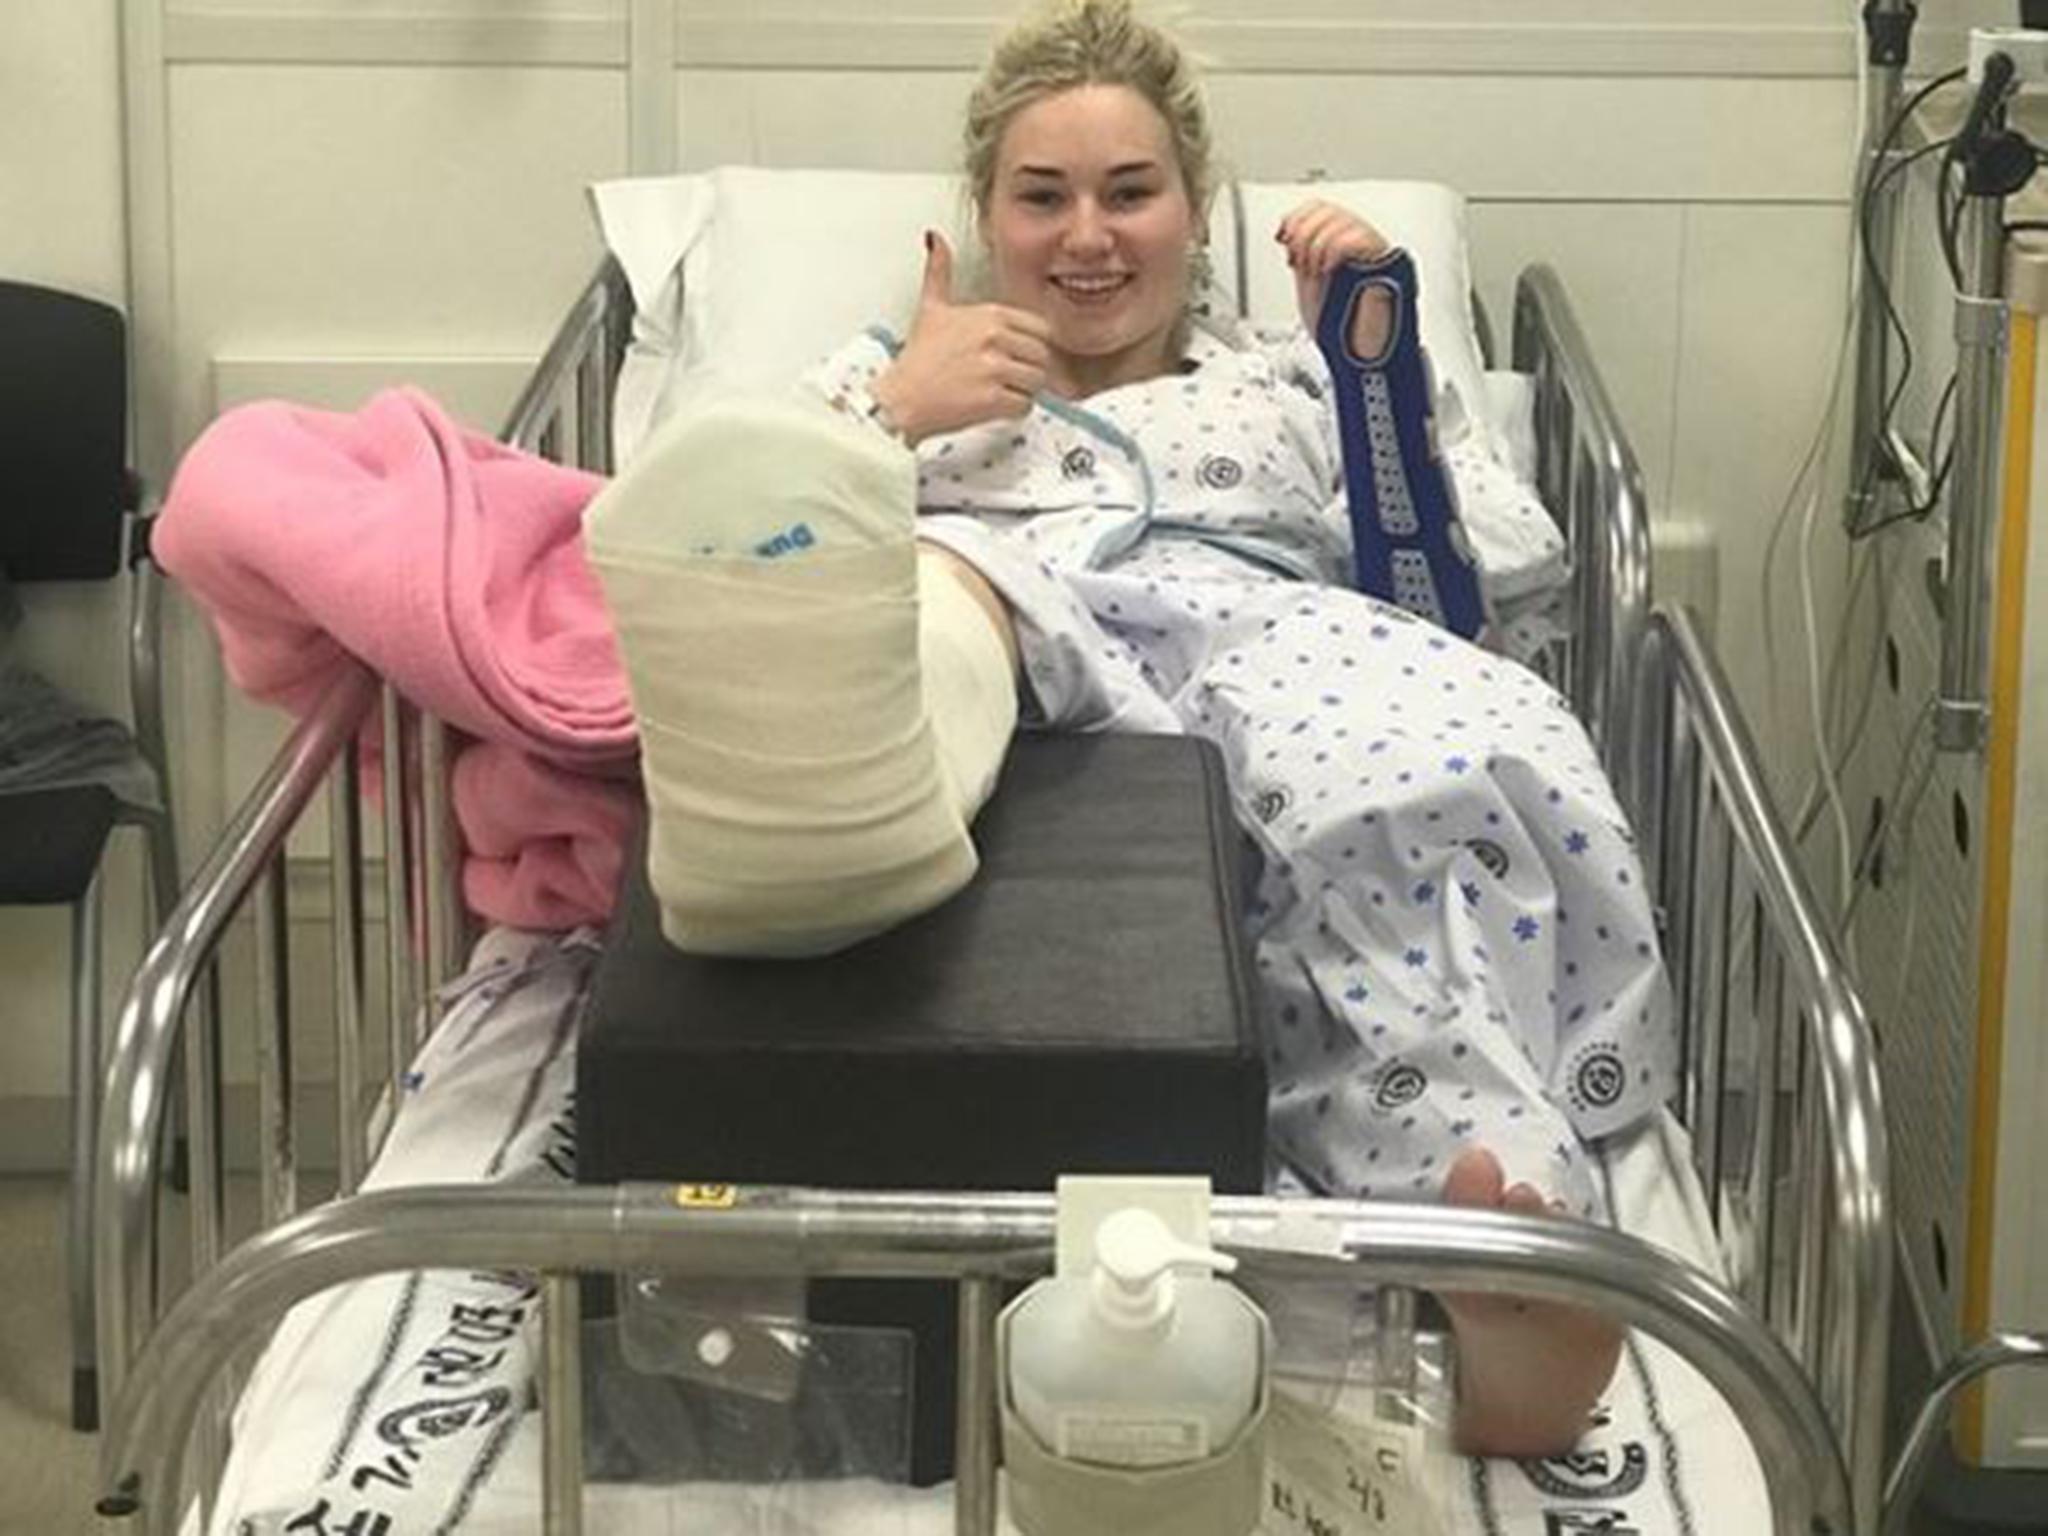 Katie Ormerod issued an update on her condition ahead of surgery on Instagram